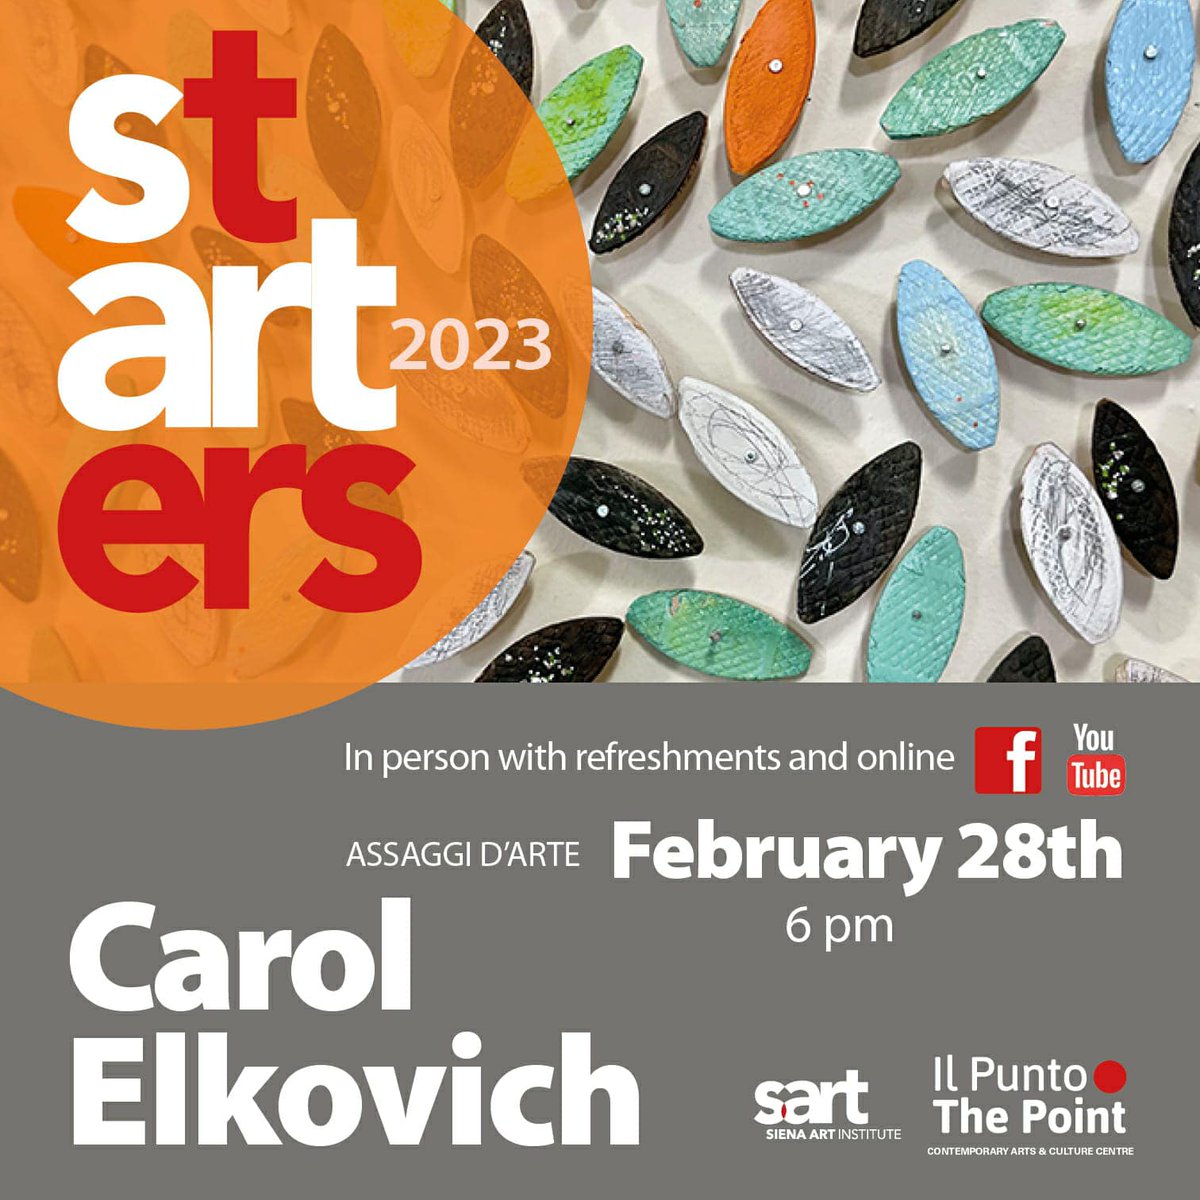 Join us today for an artist's talk with Carol Elkovich, our current resident artist!
Free and open to the public, and live-streaming online: sienaart.org/News/Carol-Elk…

#sienaartinstitute #siena #residentartist #artistinresidence #artresidency